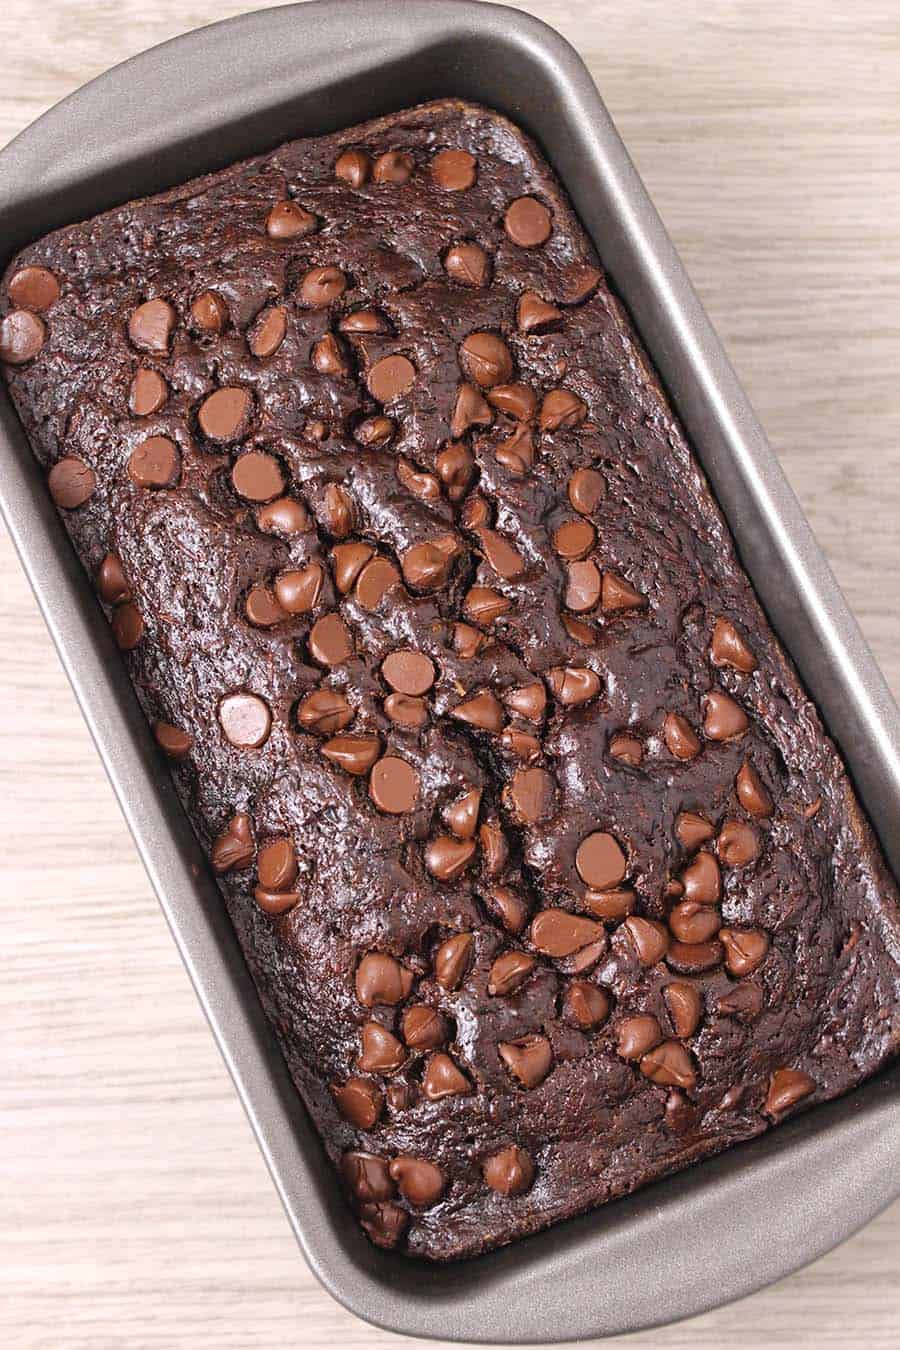  Zucchini Chocolate Cake, Muffins, death by chocolate cake, 4th of july recipe, memorial day recipes, Thanksgiving and christmas desserts, #holidaybaking 